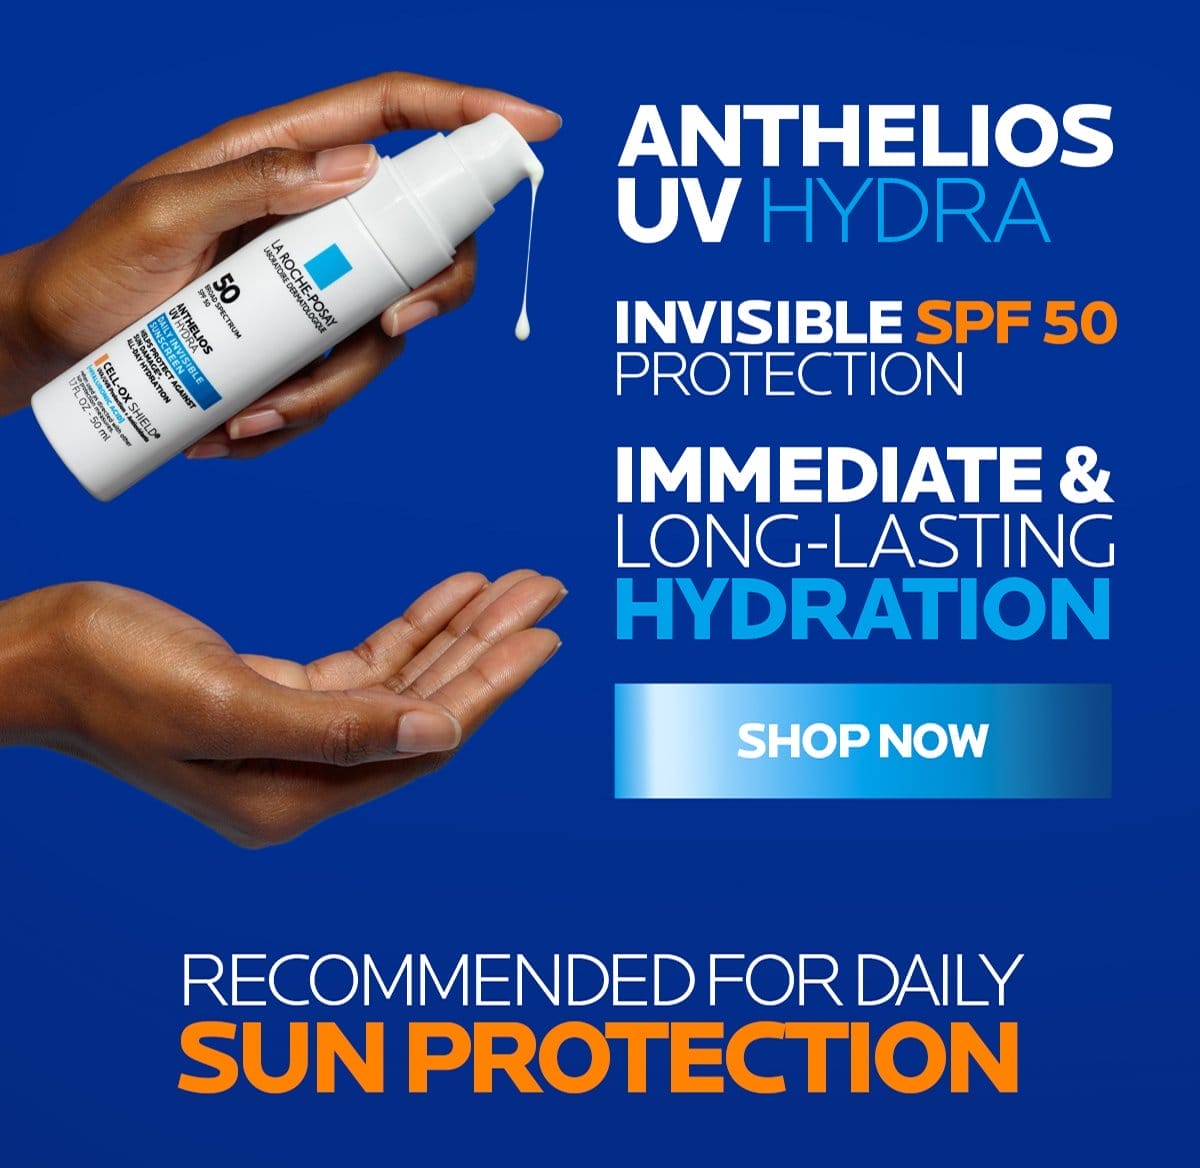 DISCOVER ANTHELIOS UV HYDRA | INVISIBLE SPF 50 PROTECTION